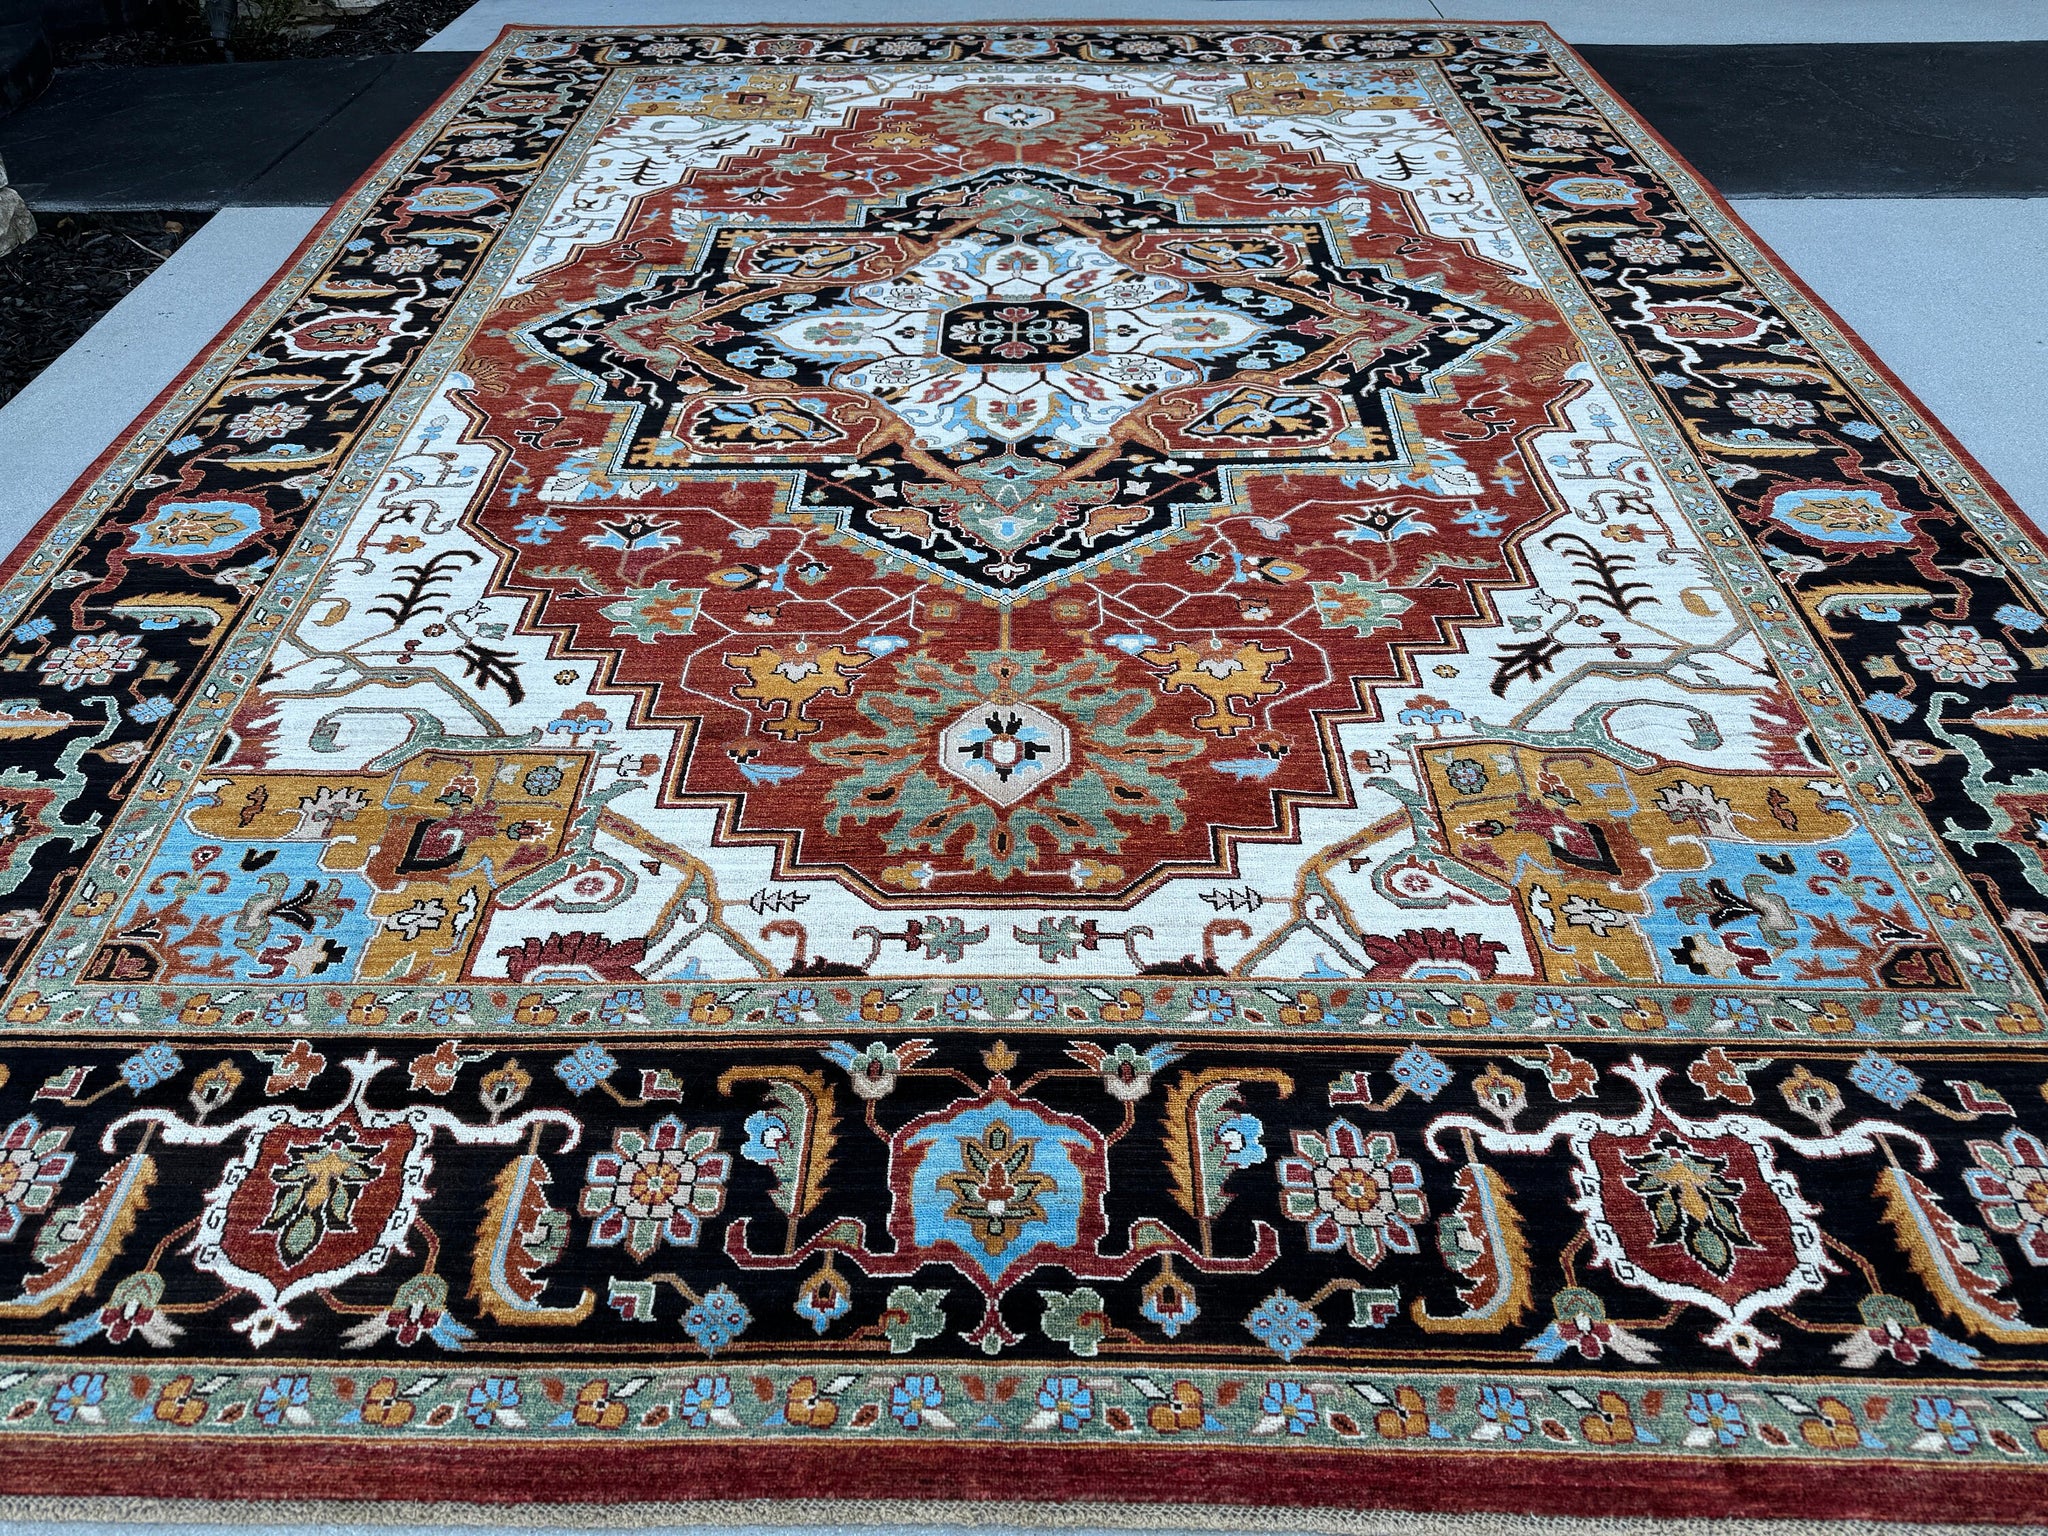 10x14 (305x400) Hand Knotted Afghan Rug | Ivory Cream Beige Black Ruby Red Teal Terracotta Honey Moss Green | Floral Persian Wool